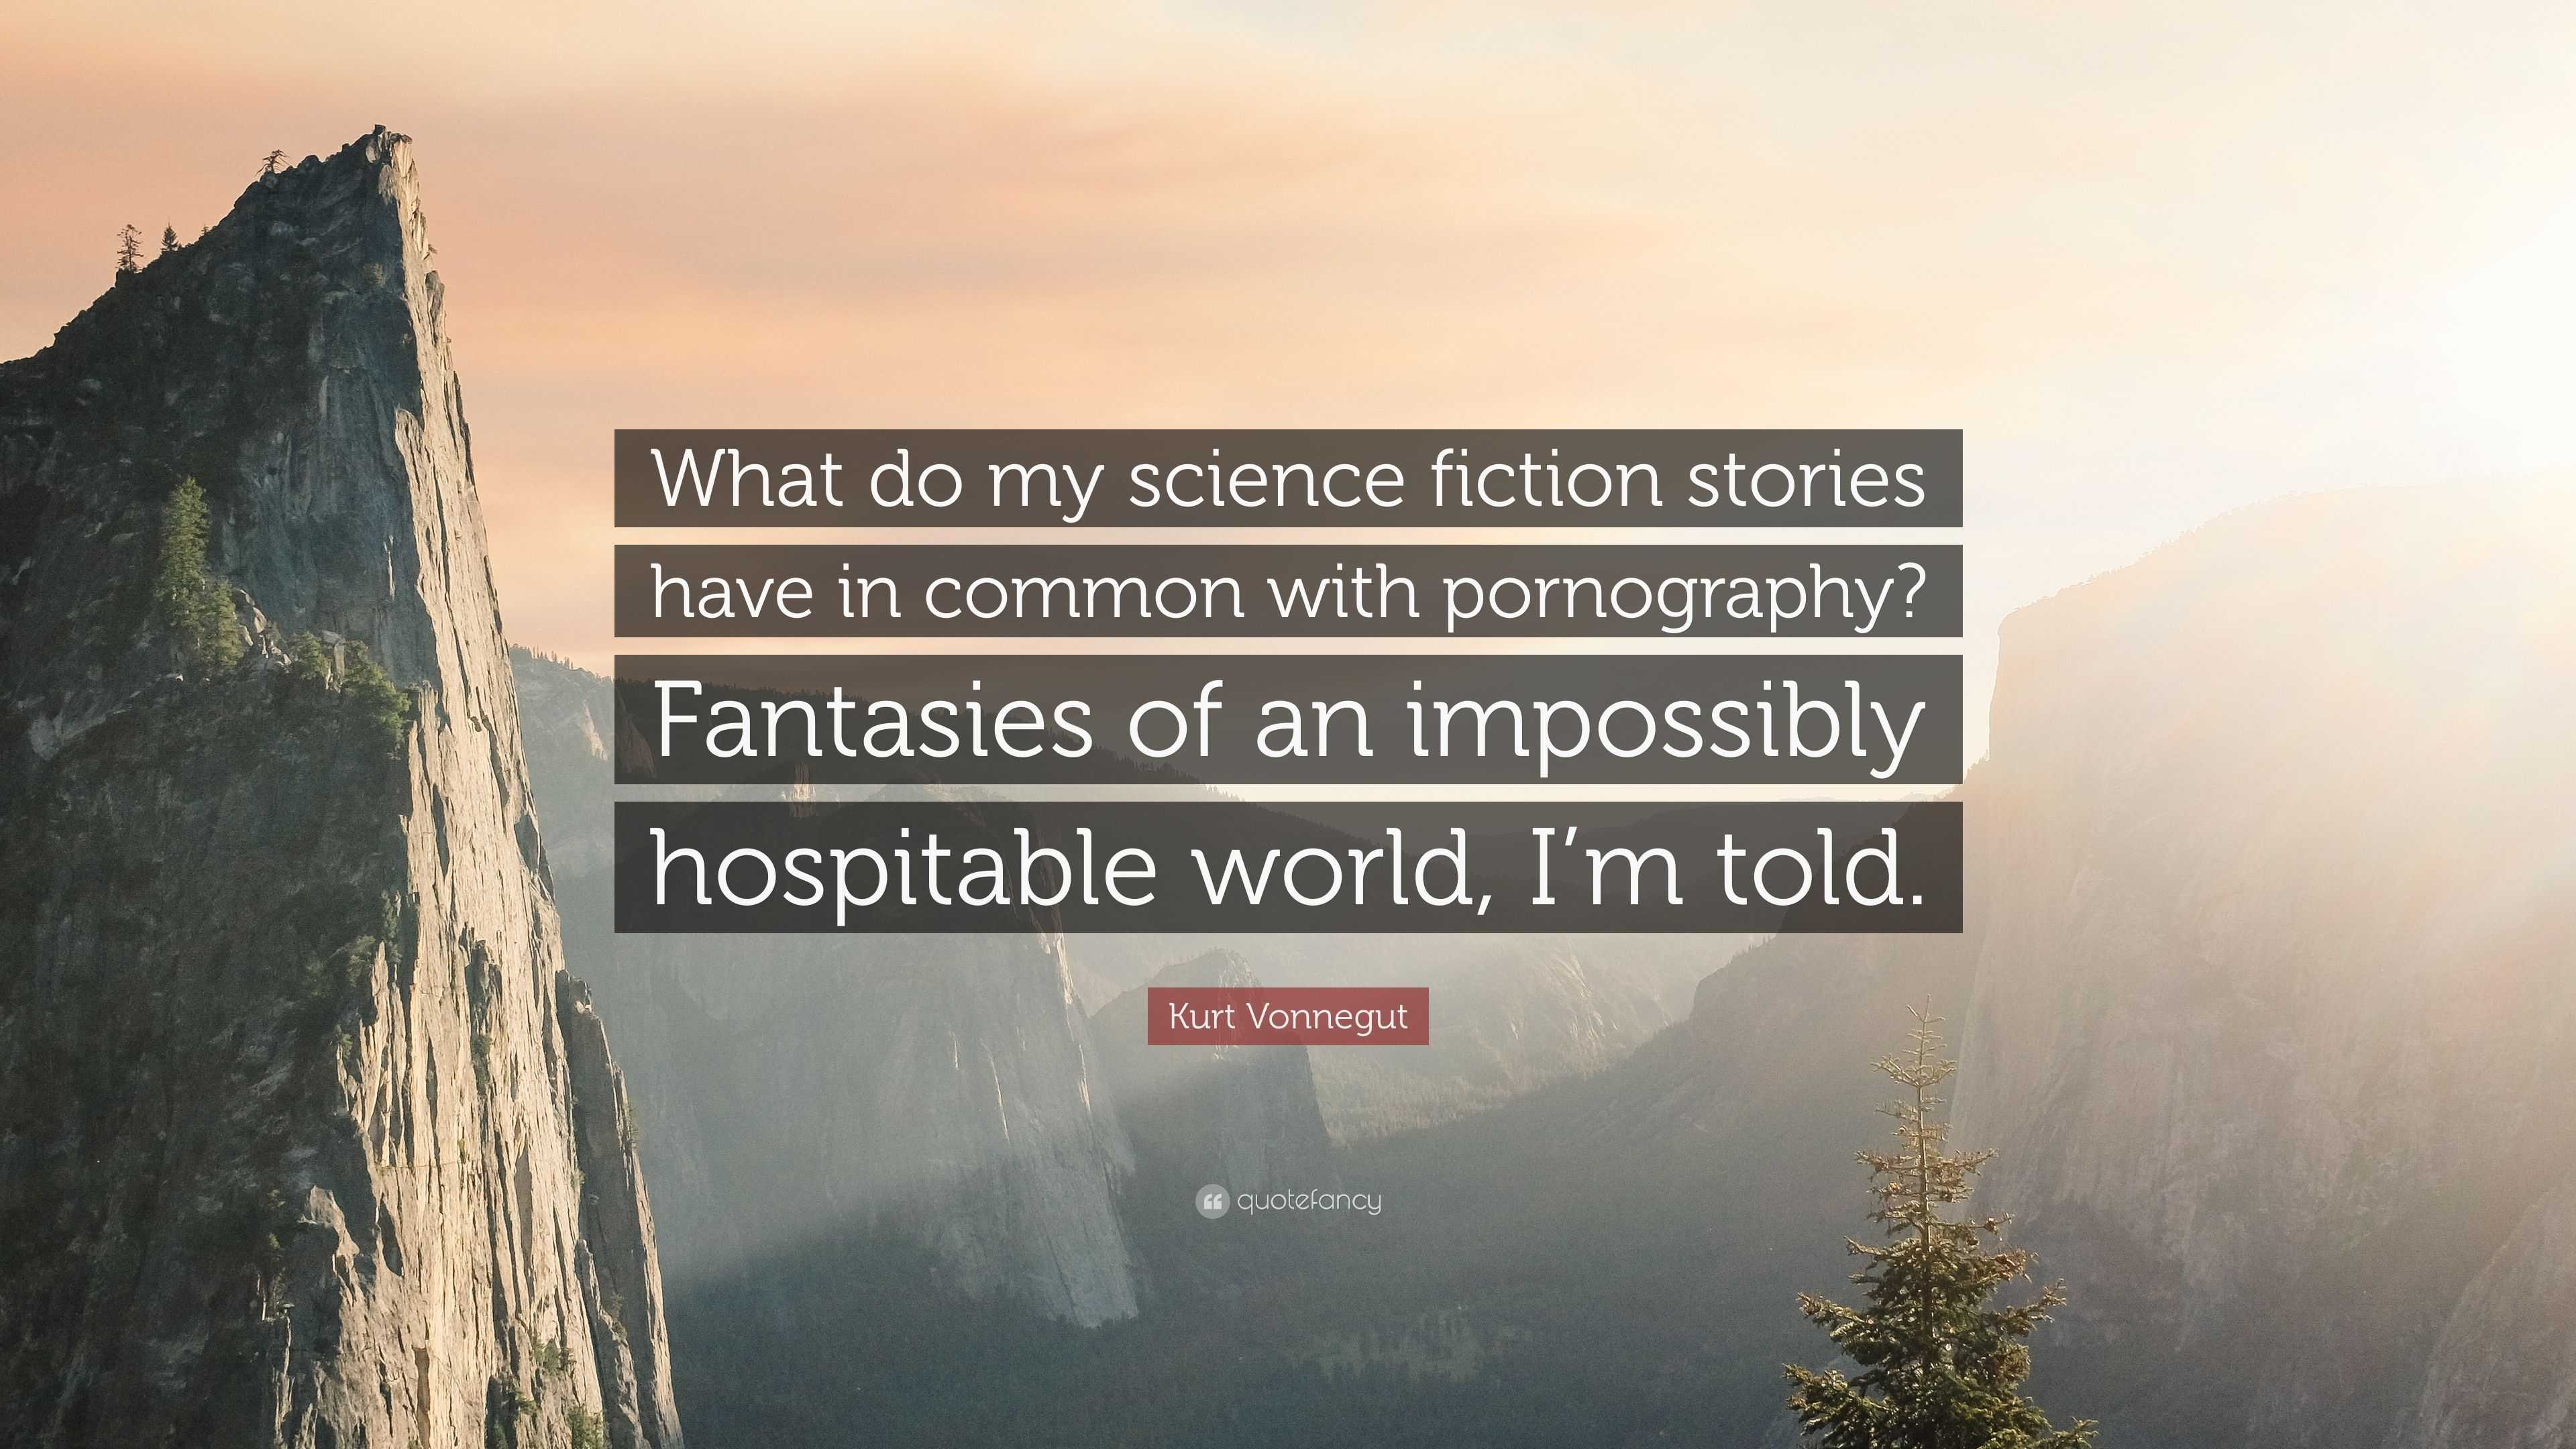 Science Fiction Pornography - Kurt Vonnegut Quote: â€œWhat do my science fiction stories have in common  with pornography? Fantasies of an impossibly hospitable world, I'm tol...â€